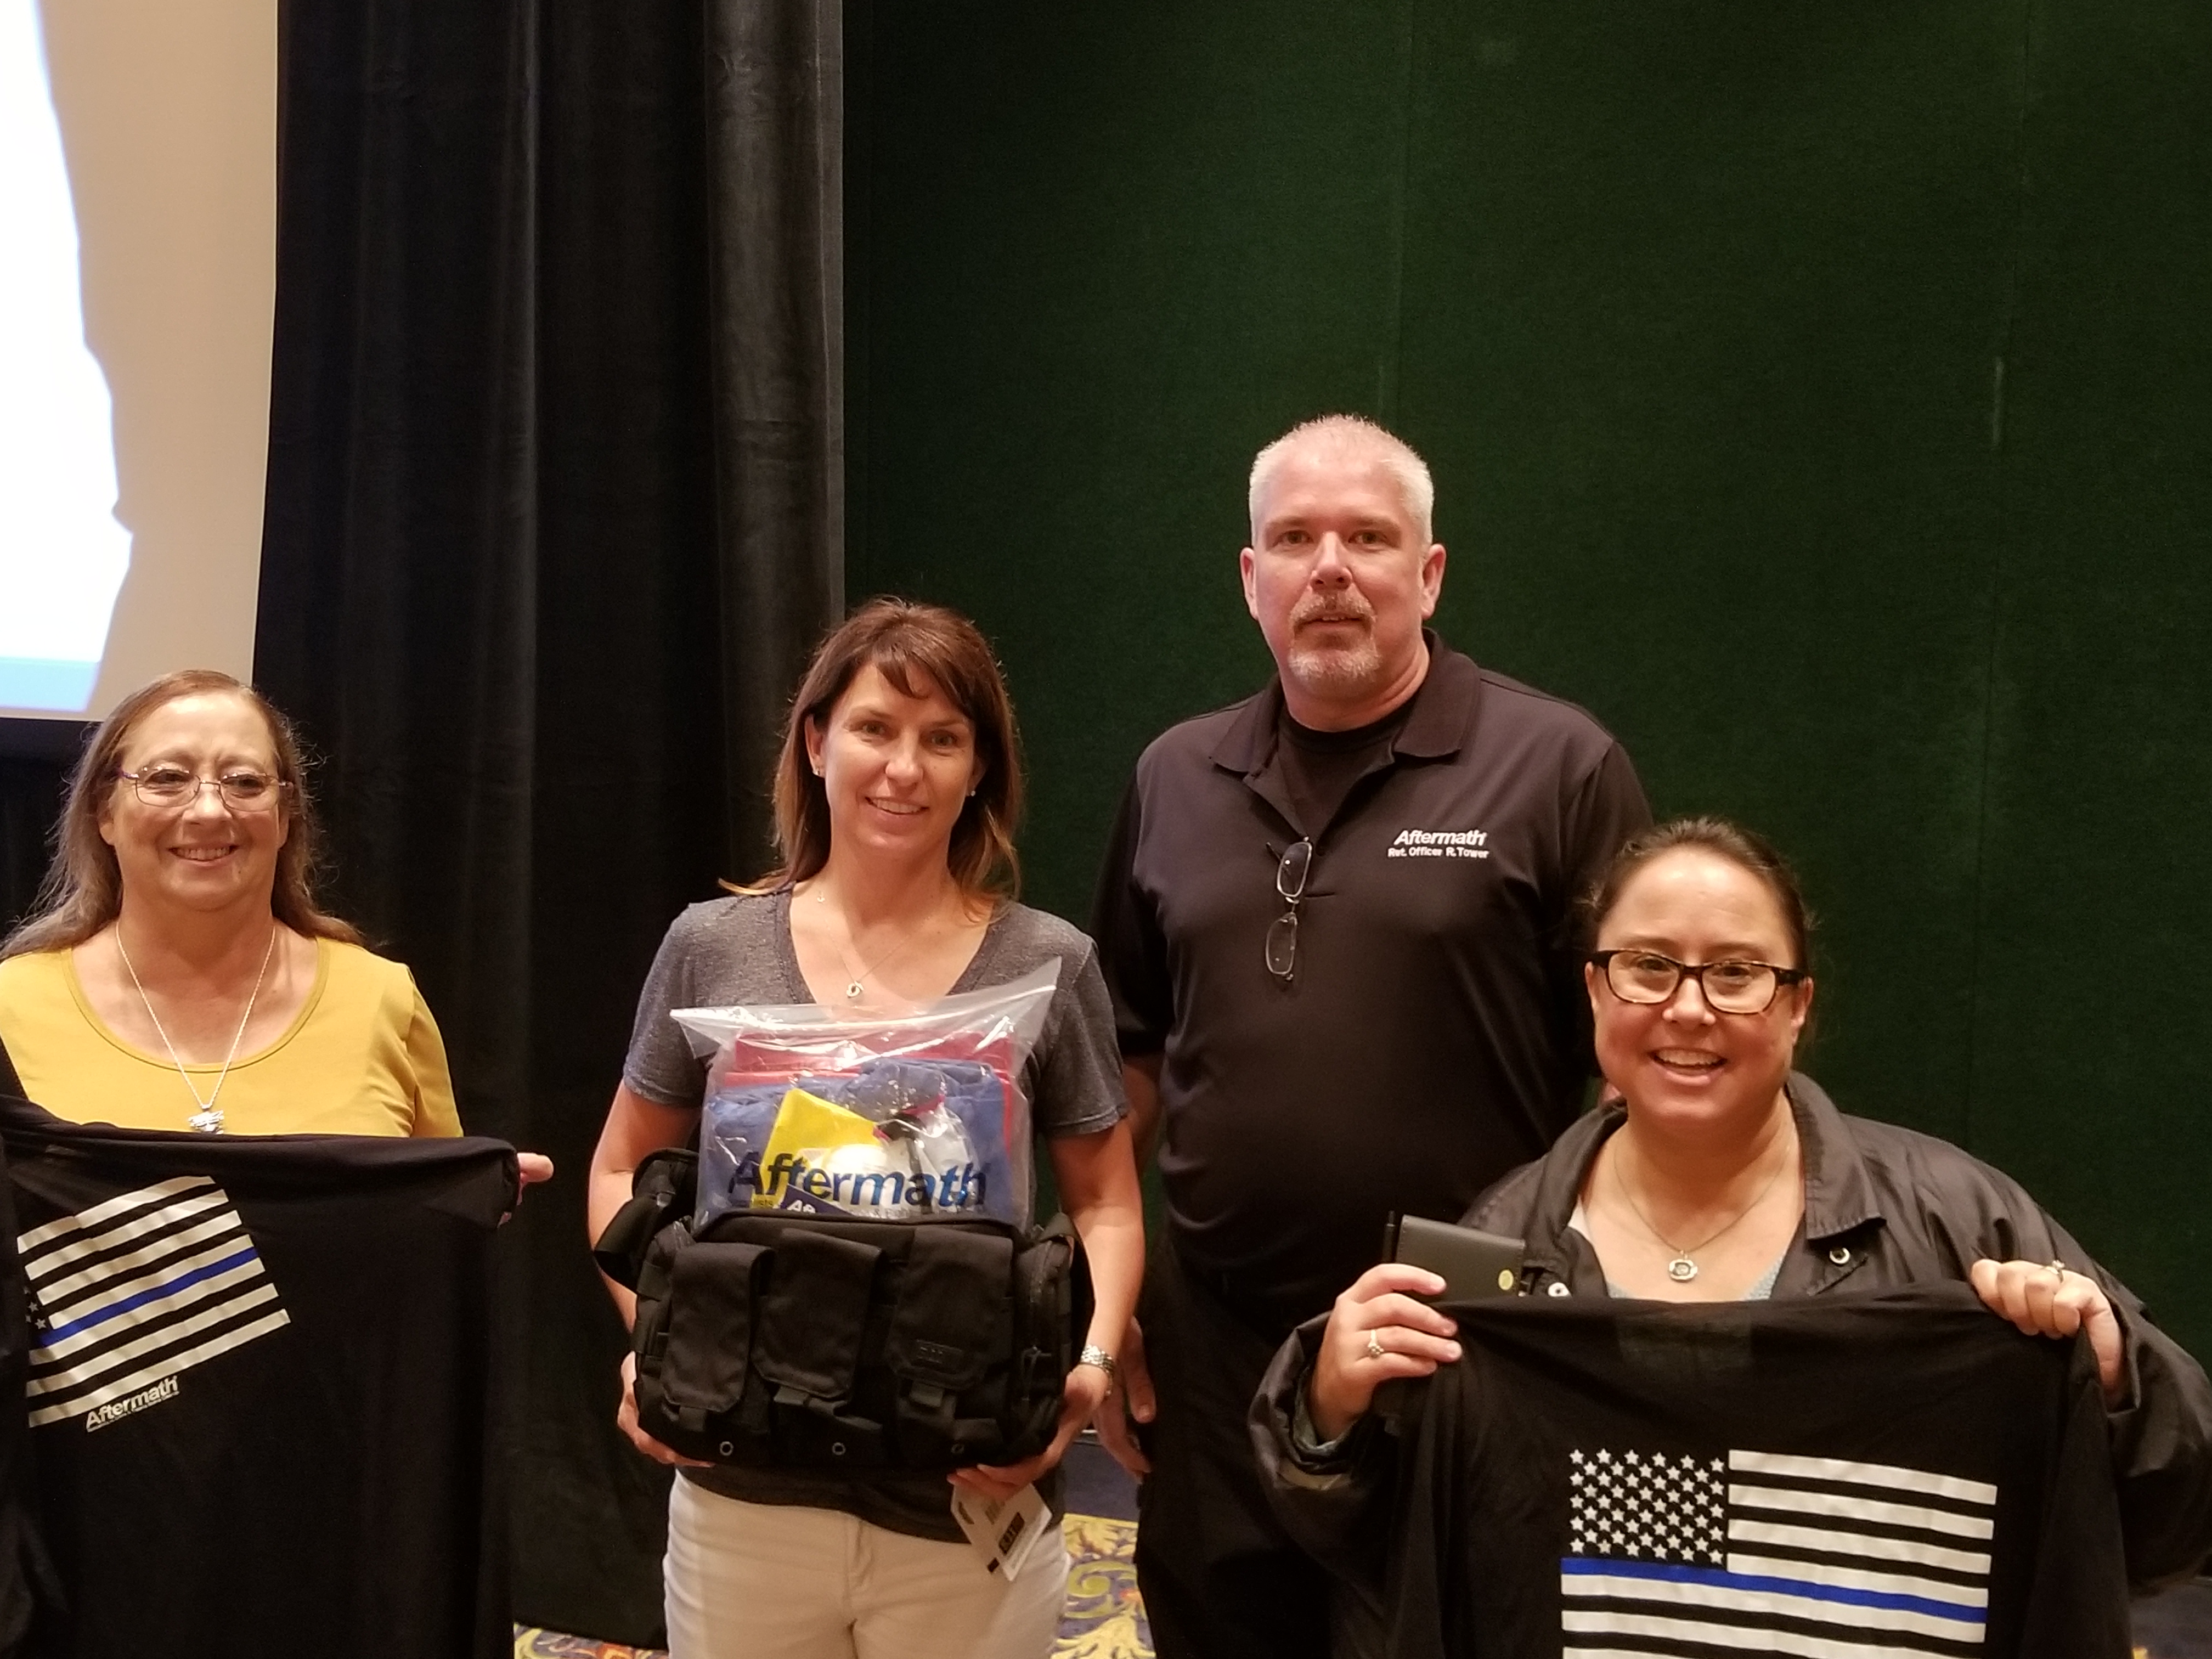 Aftermath awards prizes at the 2018 Florida Association of Medical Examiners Conference.